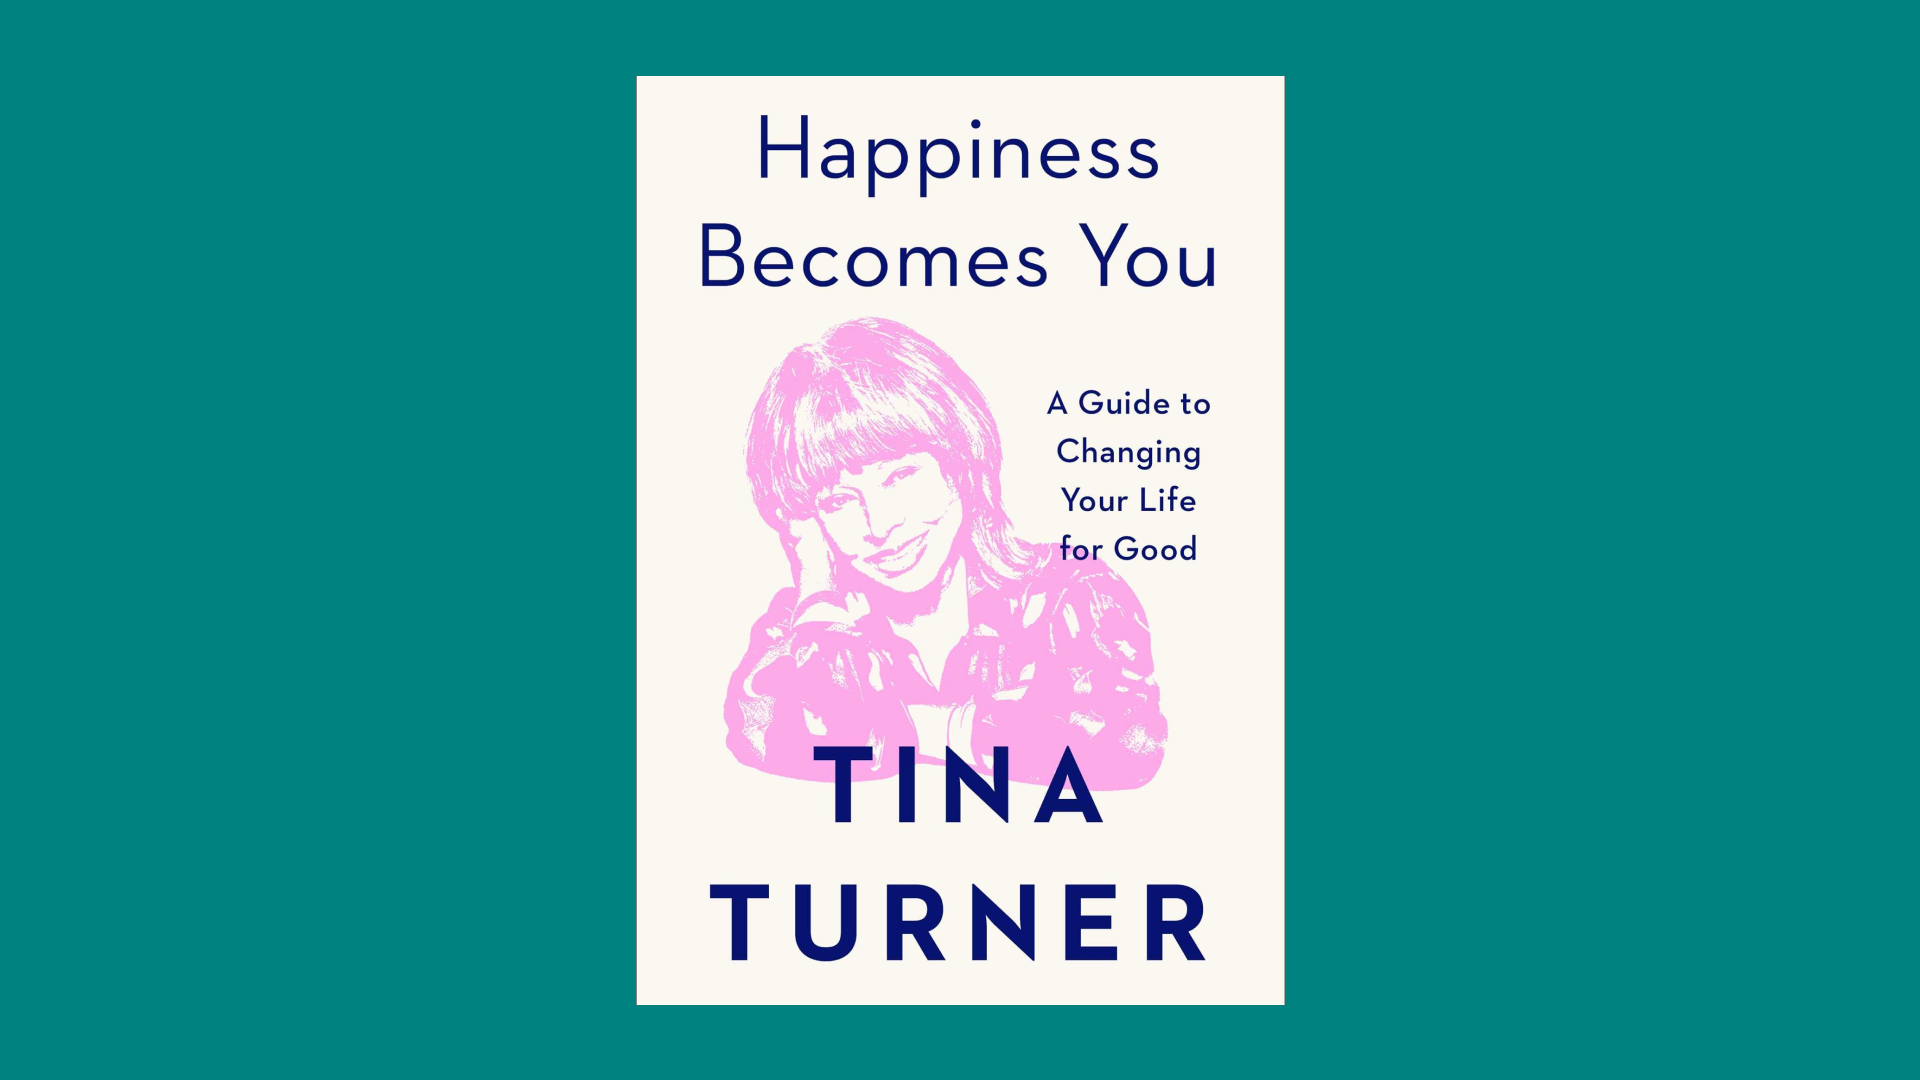 “Happiness Becomes You: A Guide to Changing Your Life for Good” by Tina Turner